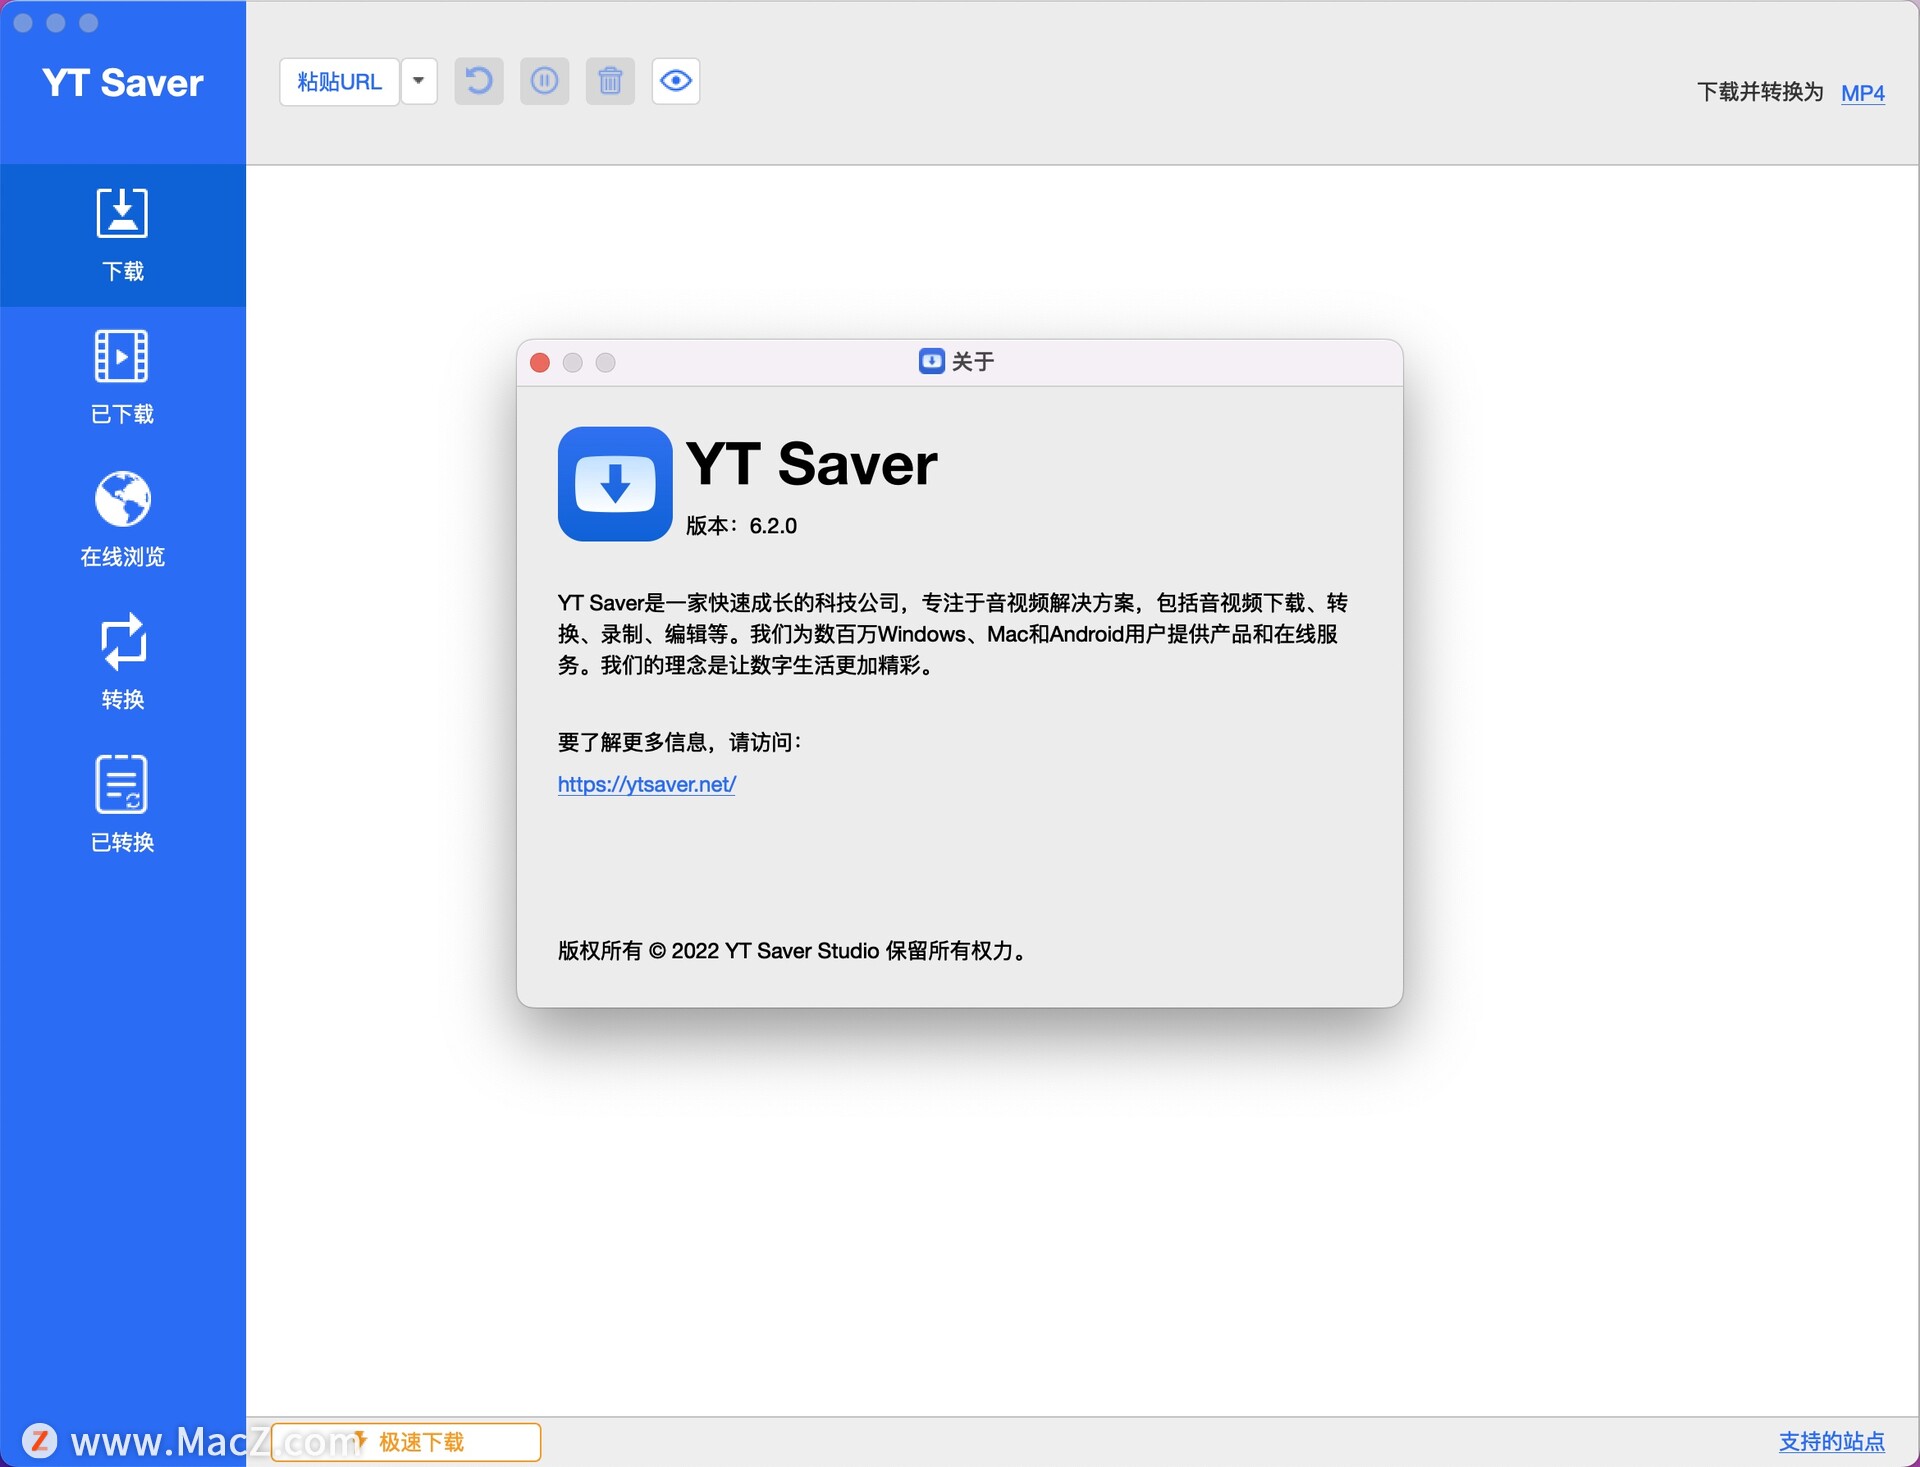 YT Saver 7.0.2 download the new